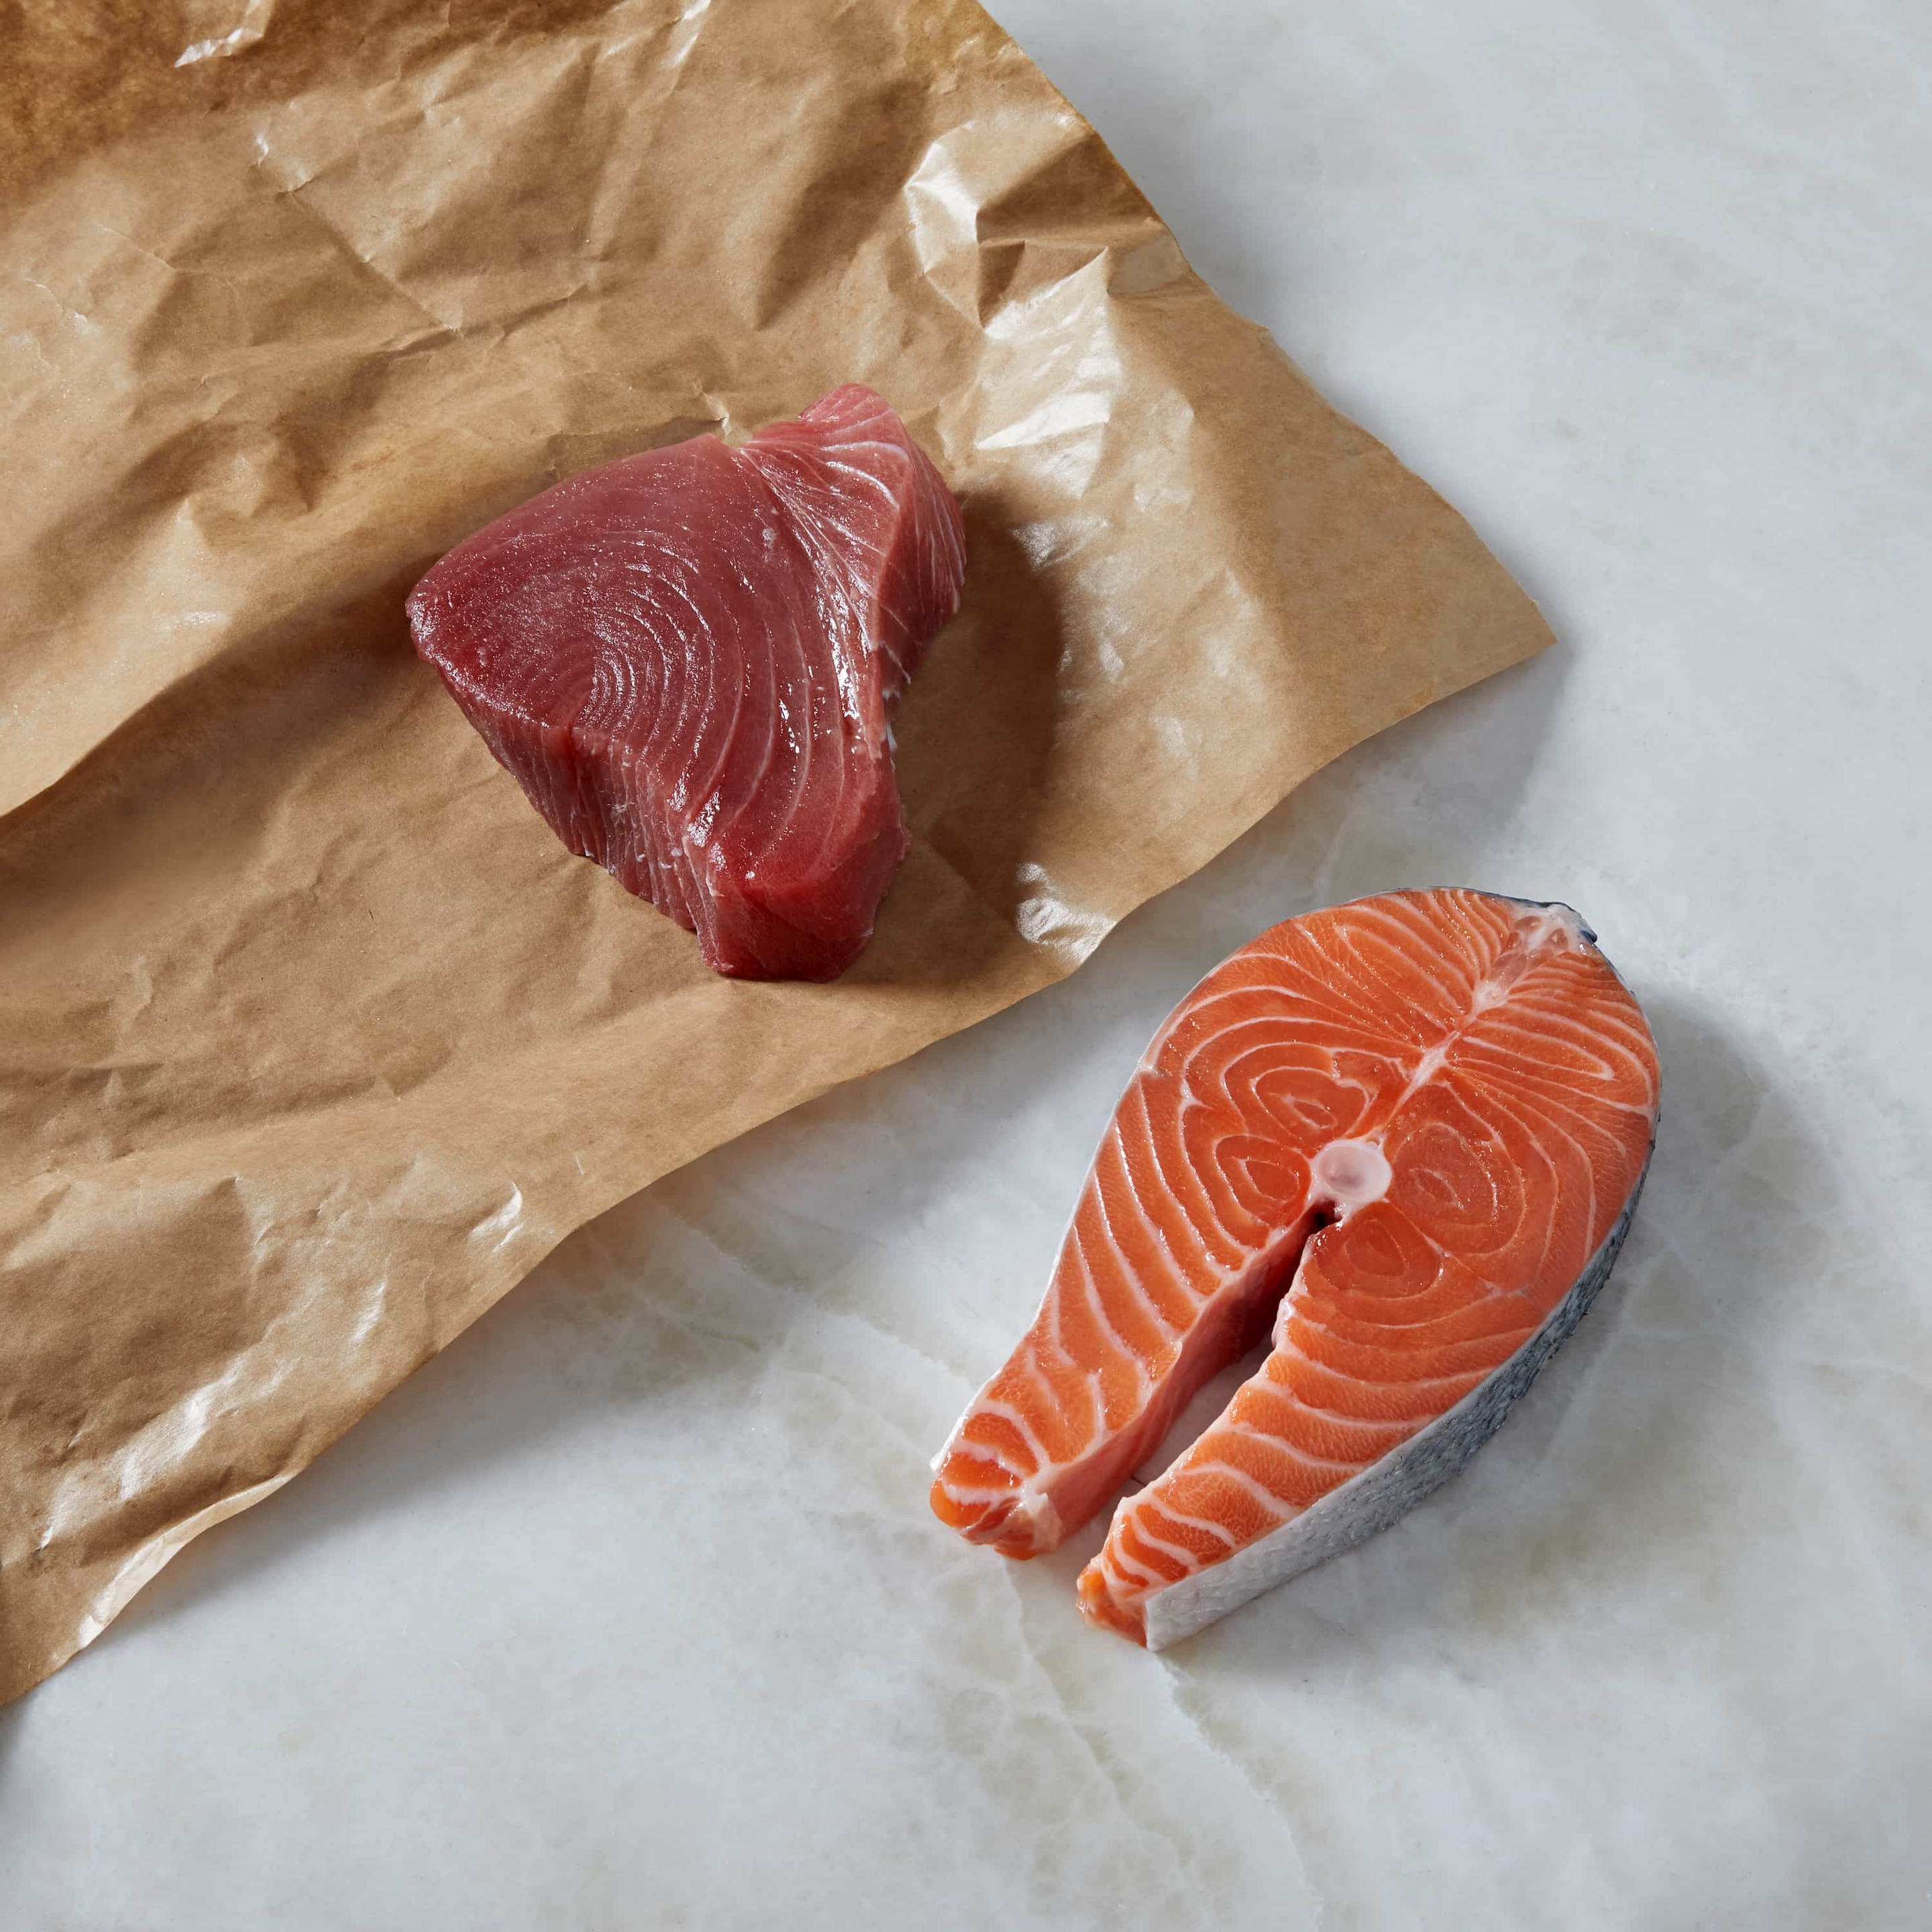 Raw tuna fillet and raw salmon fillet